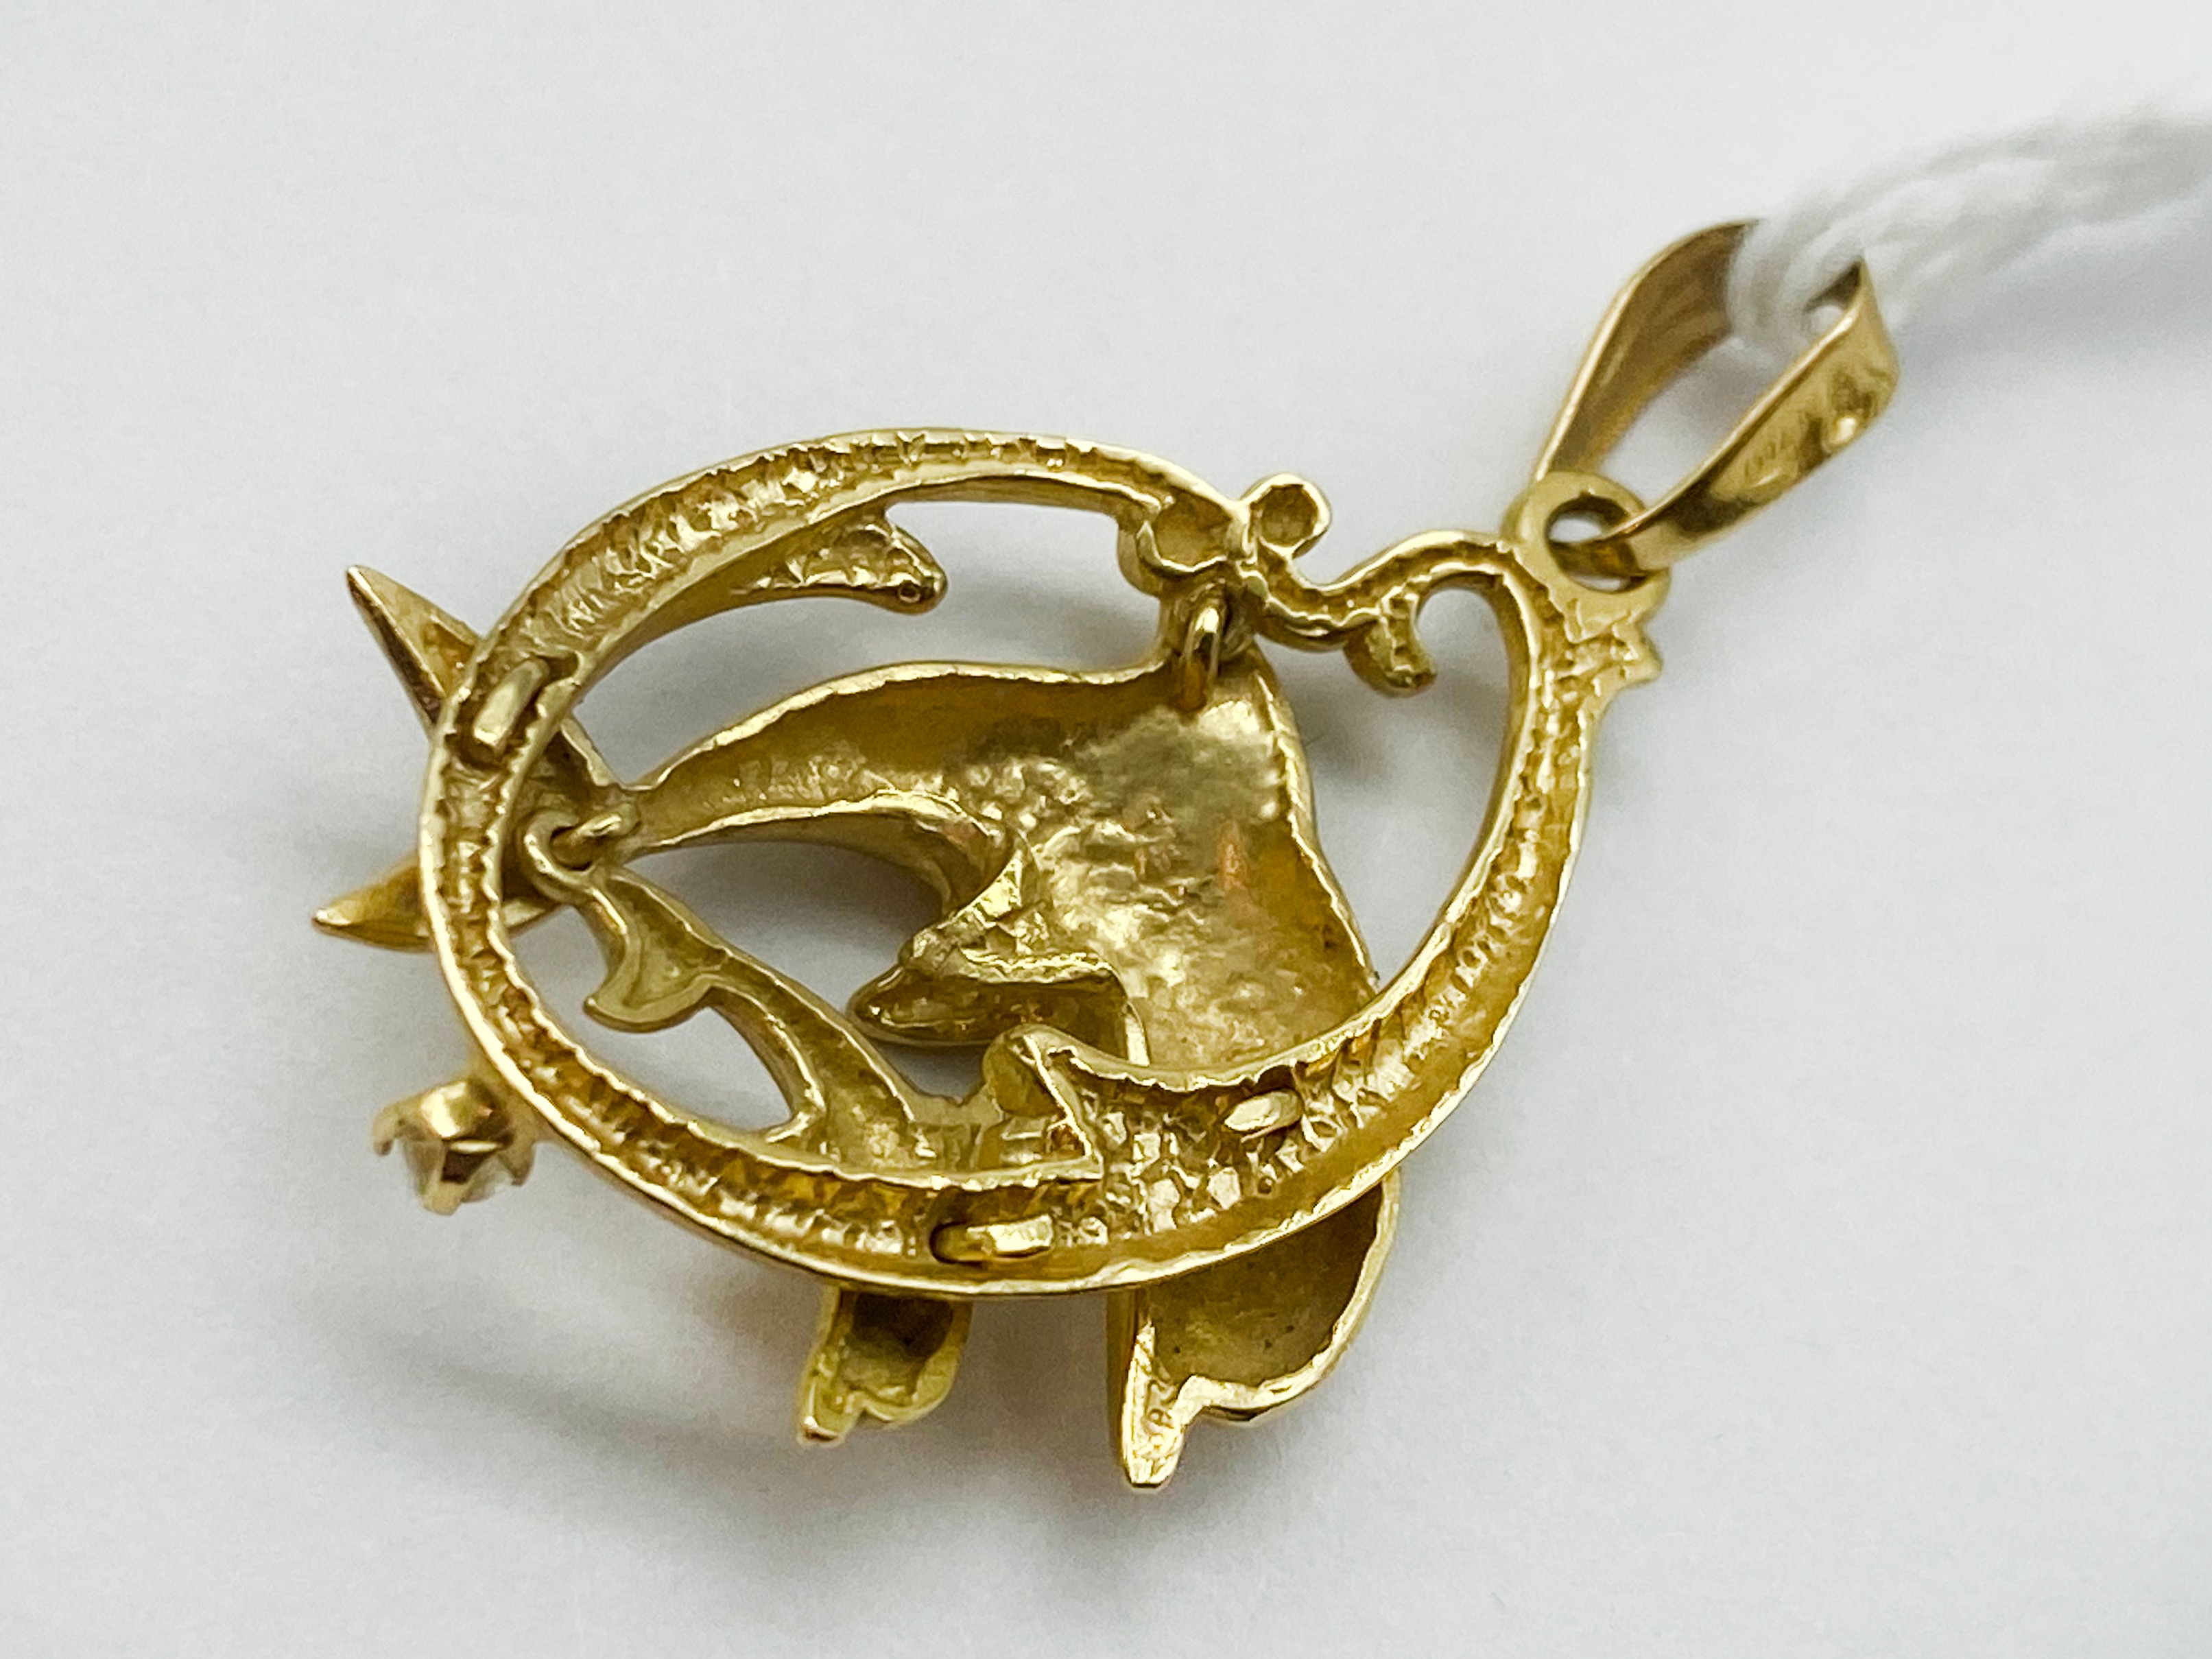 9CT GOLD DOLPHIN PENDANT - Image 3 of 3